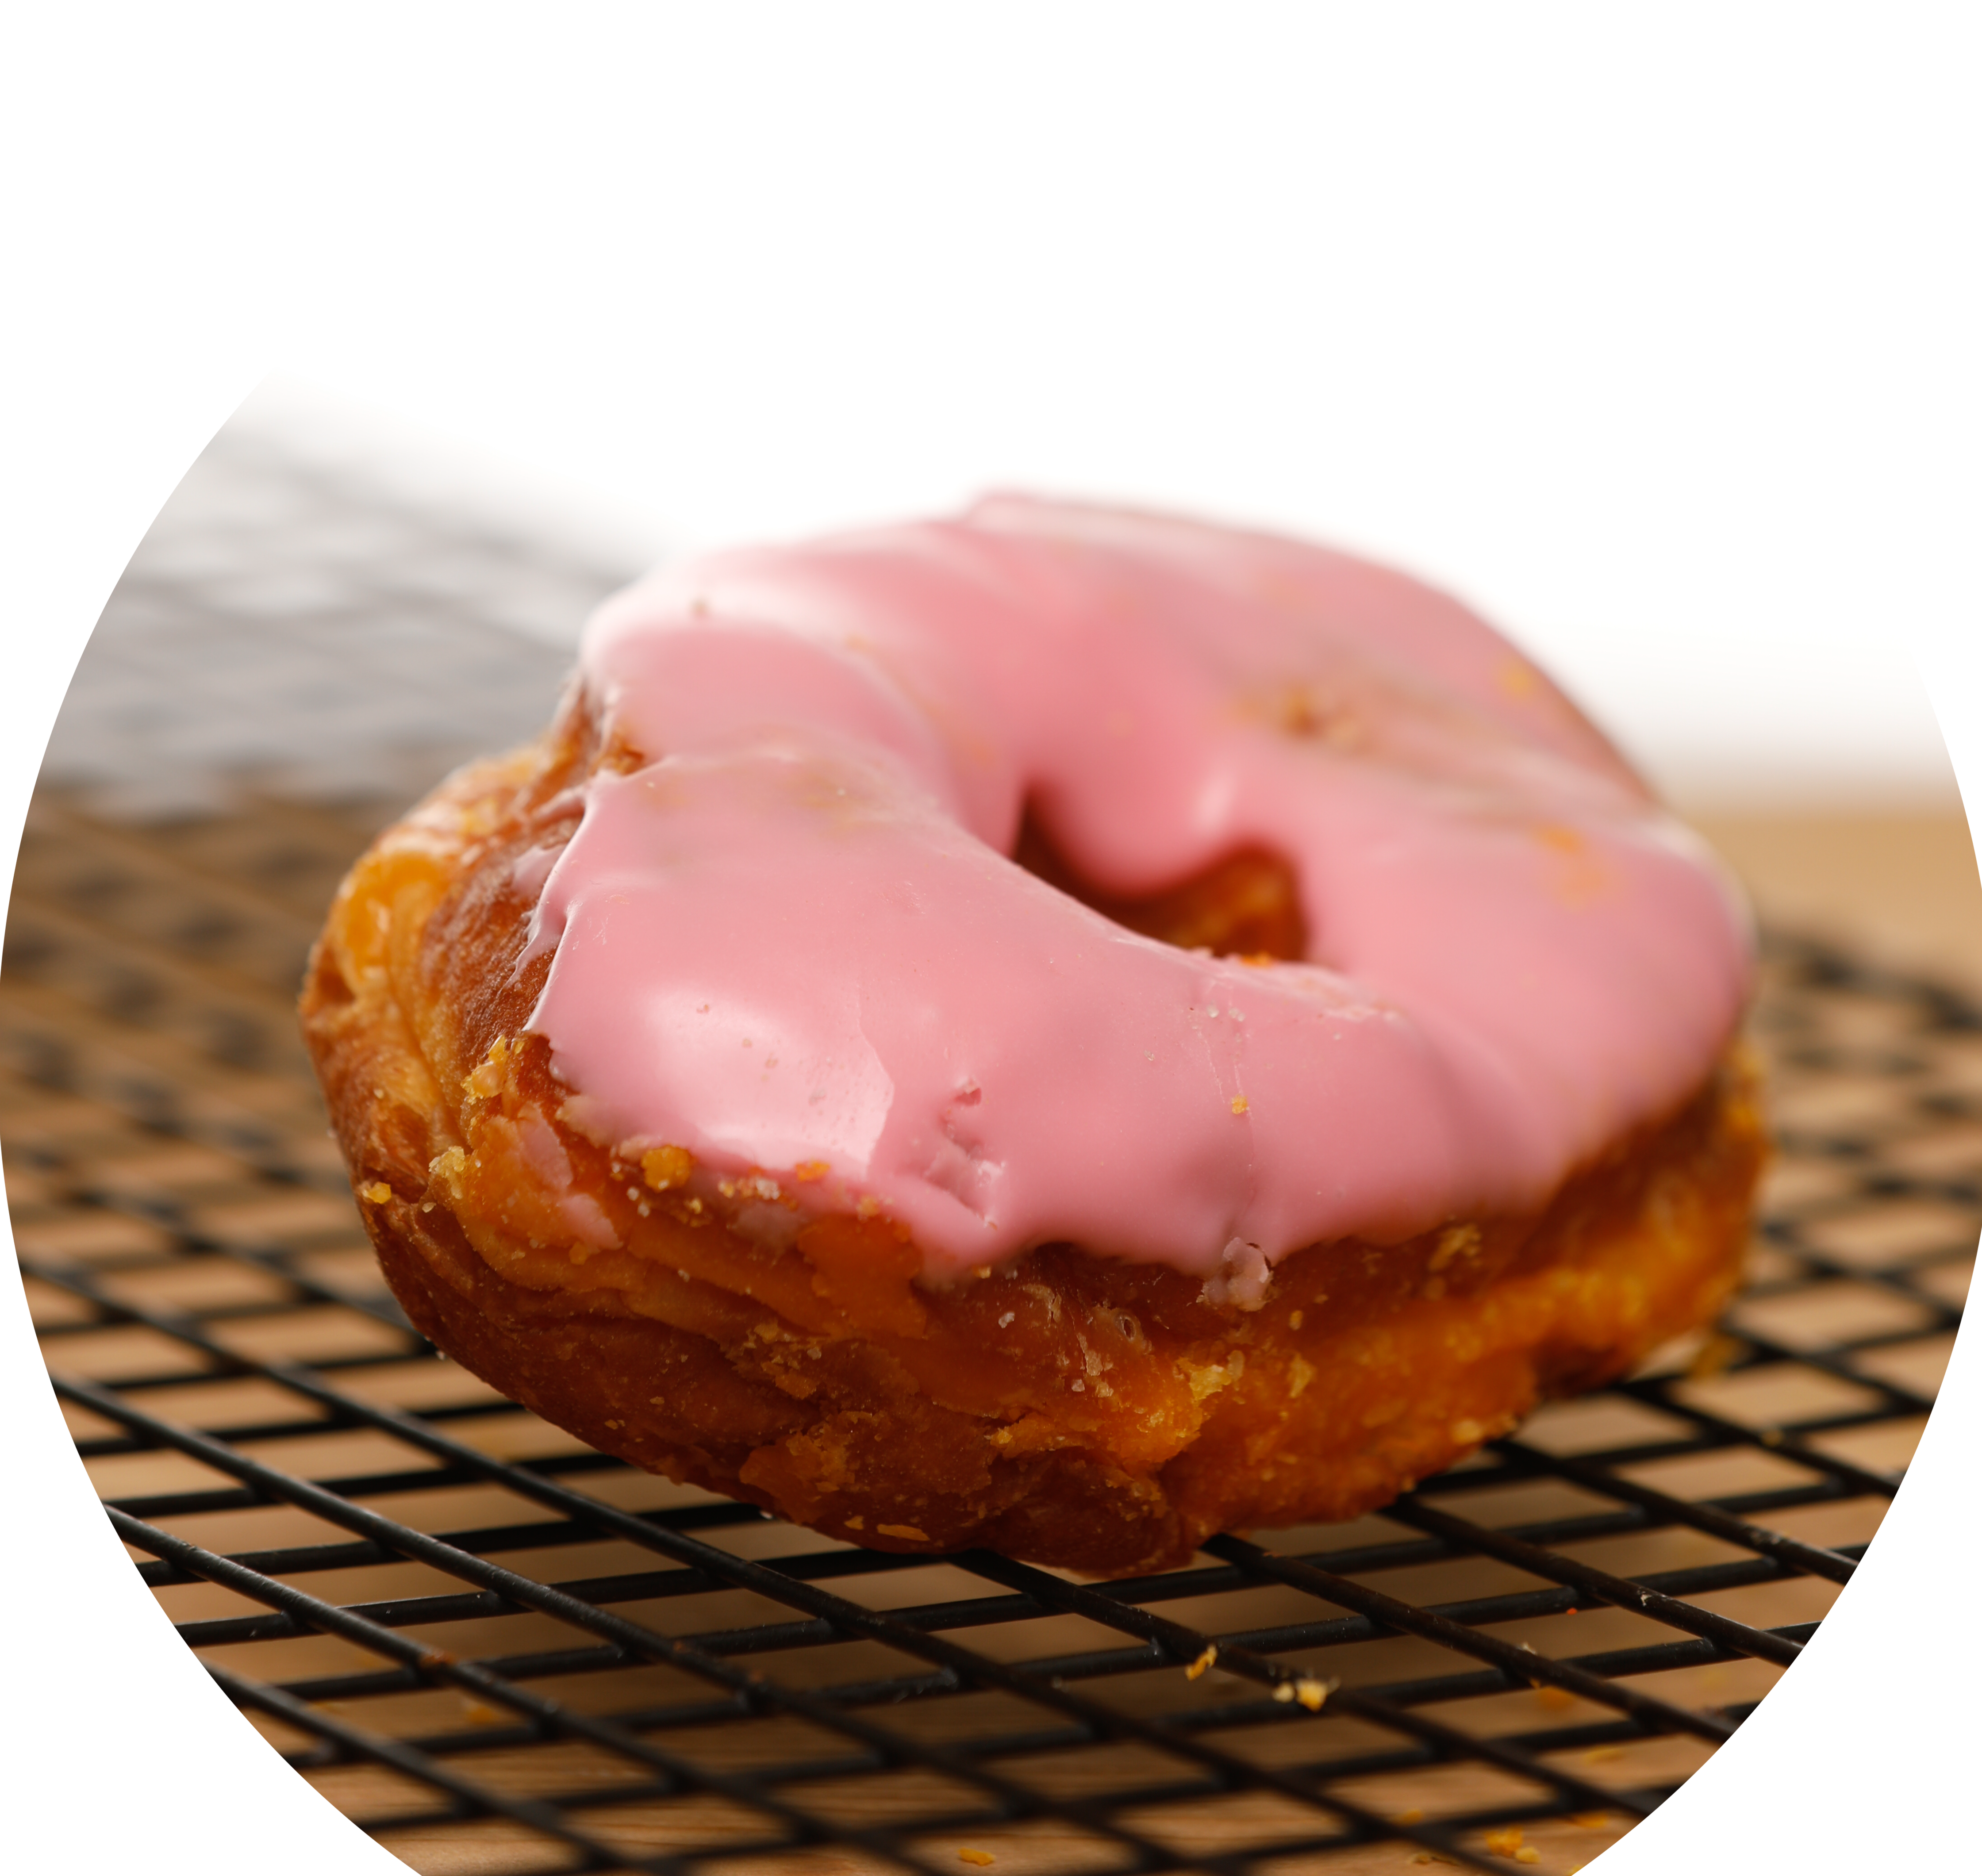 this is the image of a round rock donut